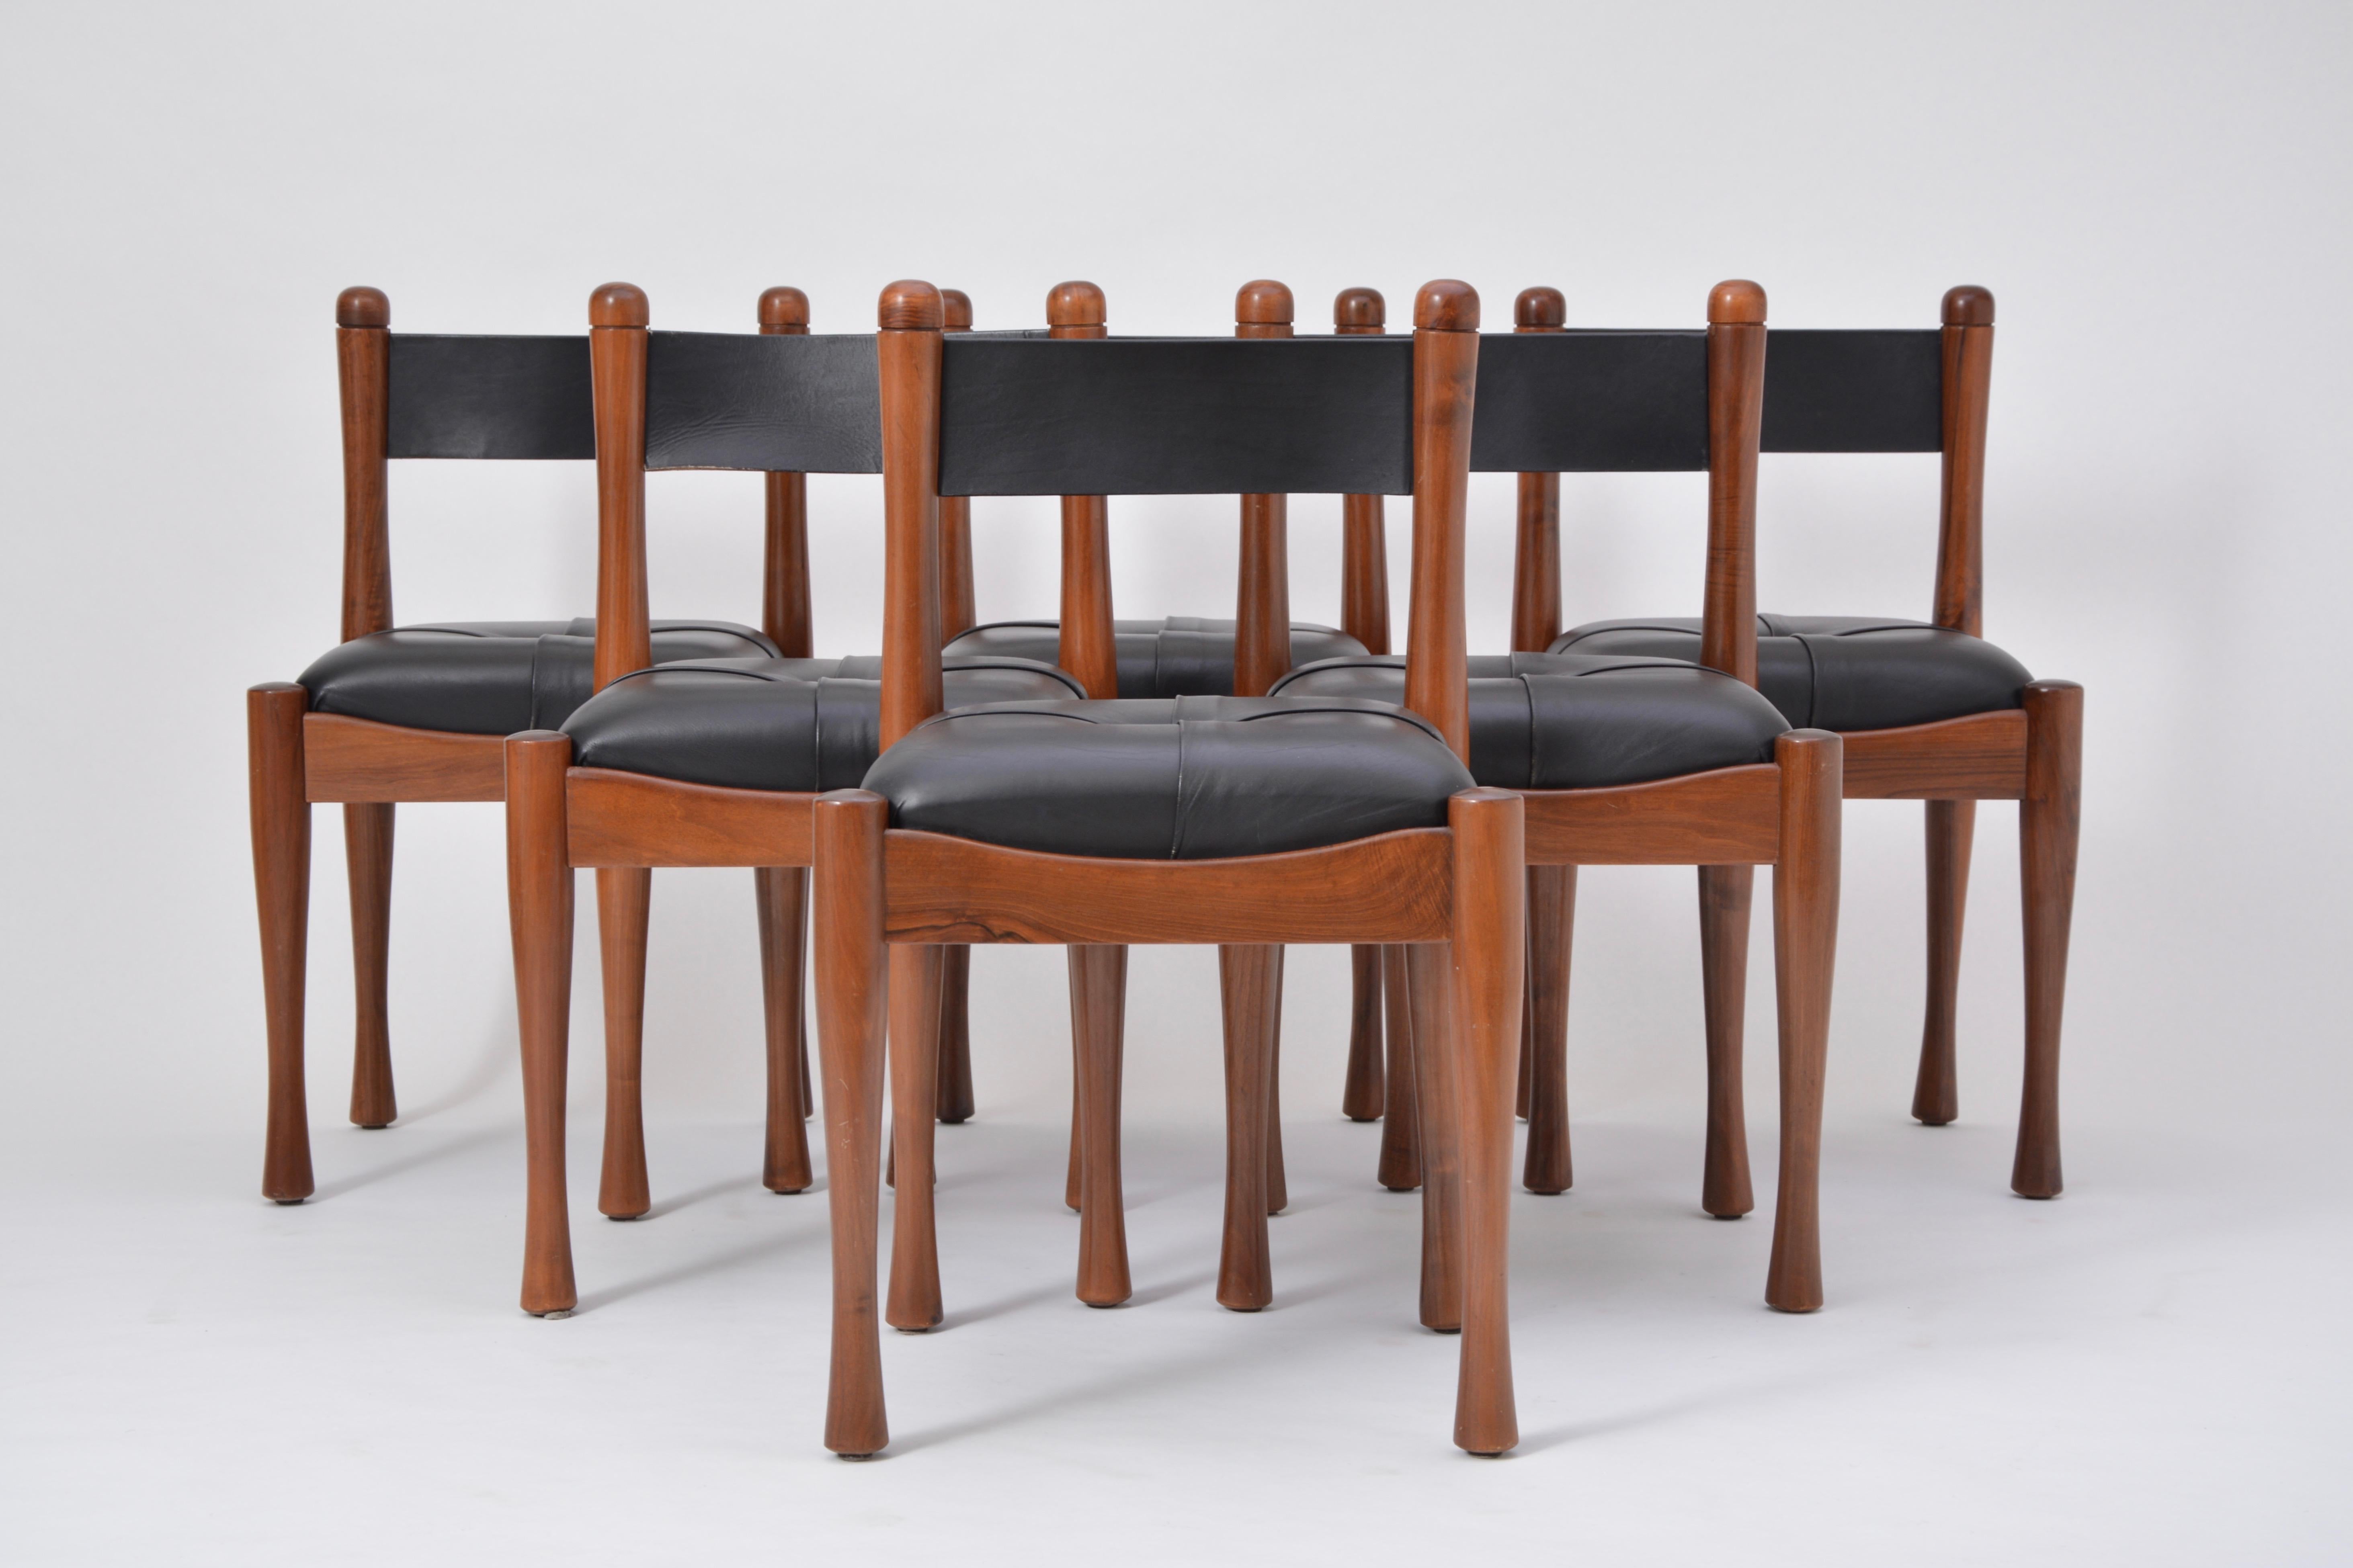 Set of six Italian Mid-Century Modern dining chairs by Silvio Coppola for Bernini

This set of six chairs was designed by Silvio Coppola for Bernini, and produced in the 1970s in Italy. The chairs frame are made of beech wood with foam padding and